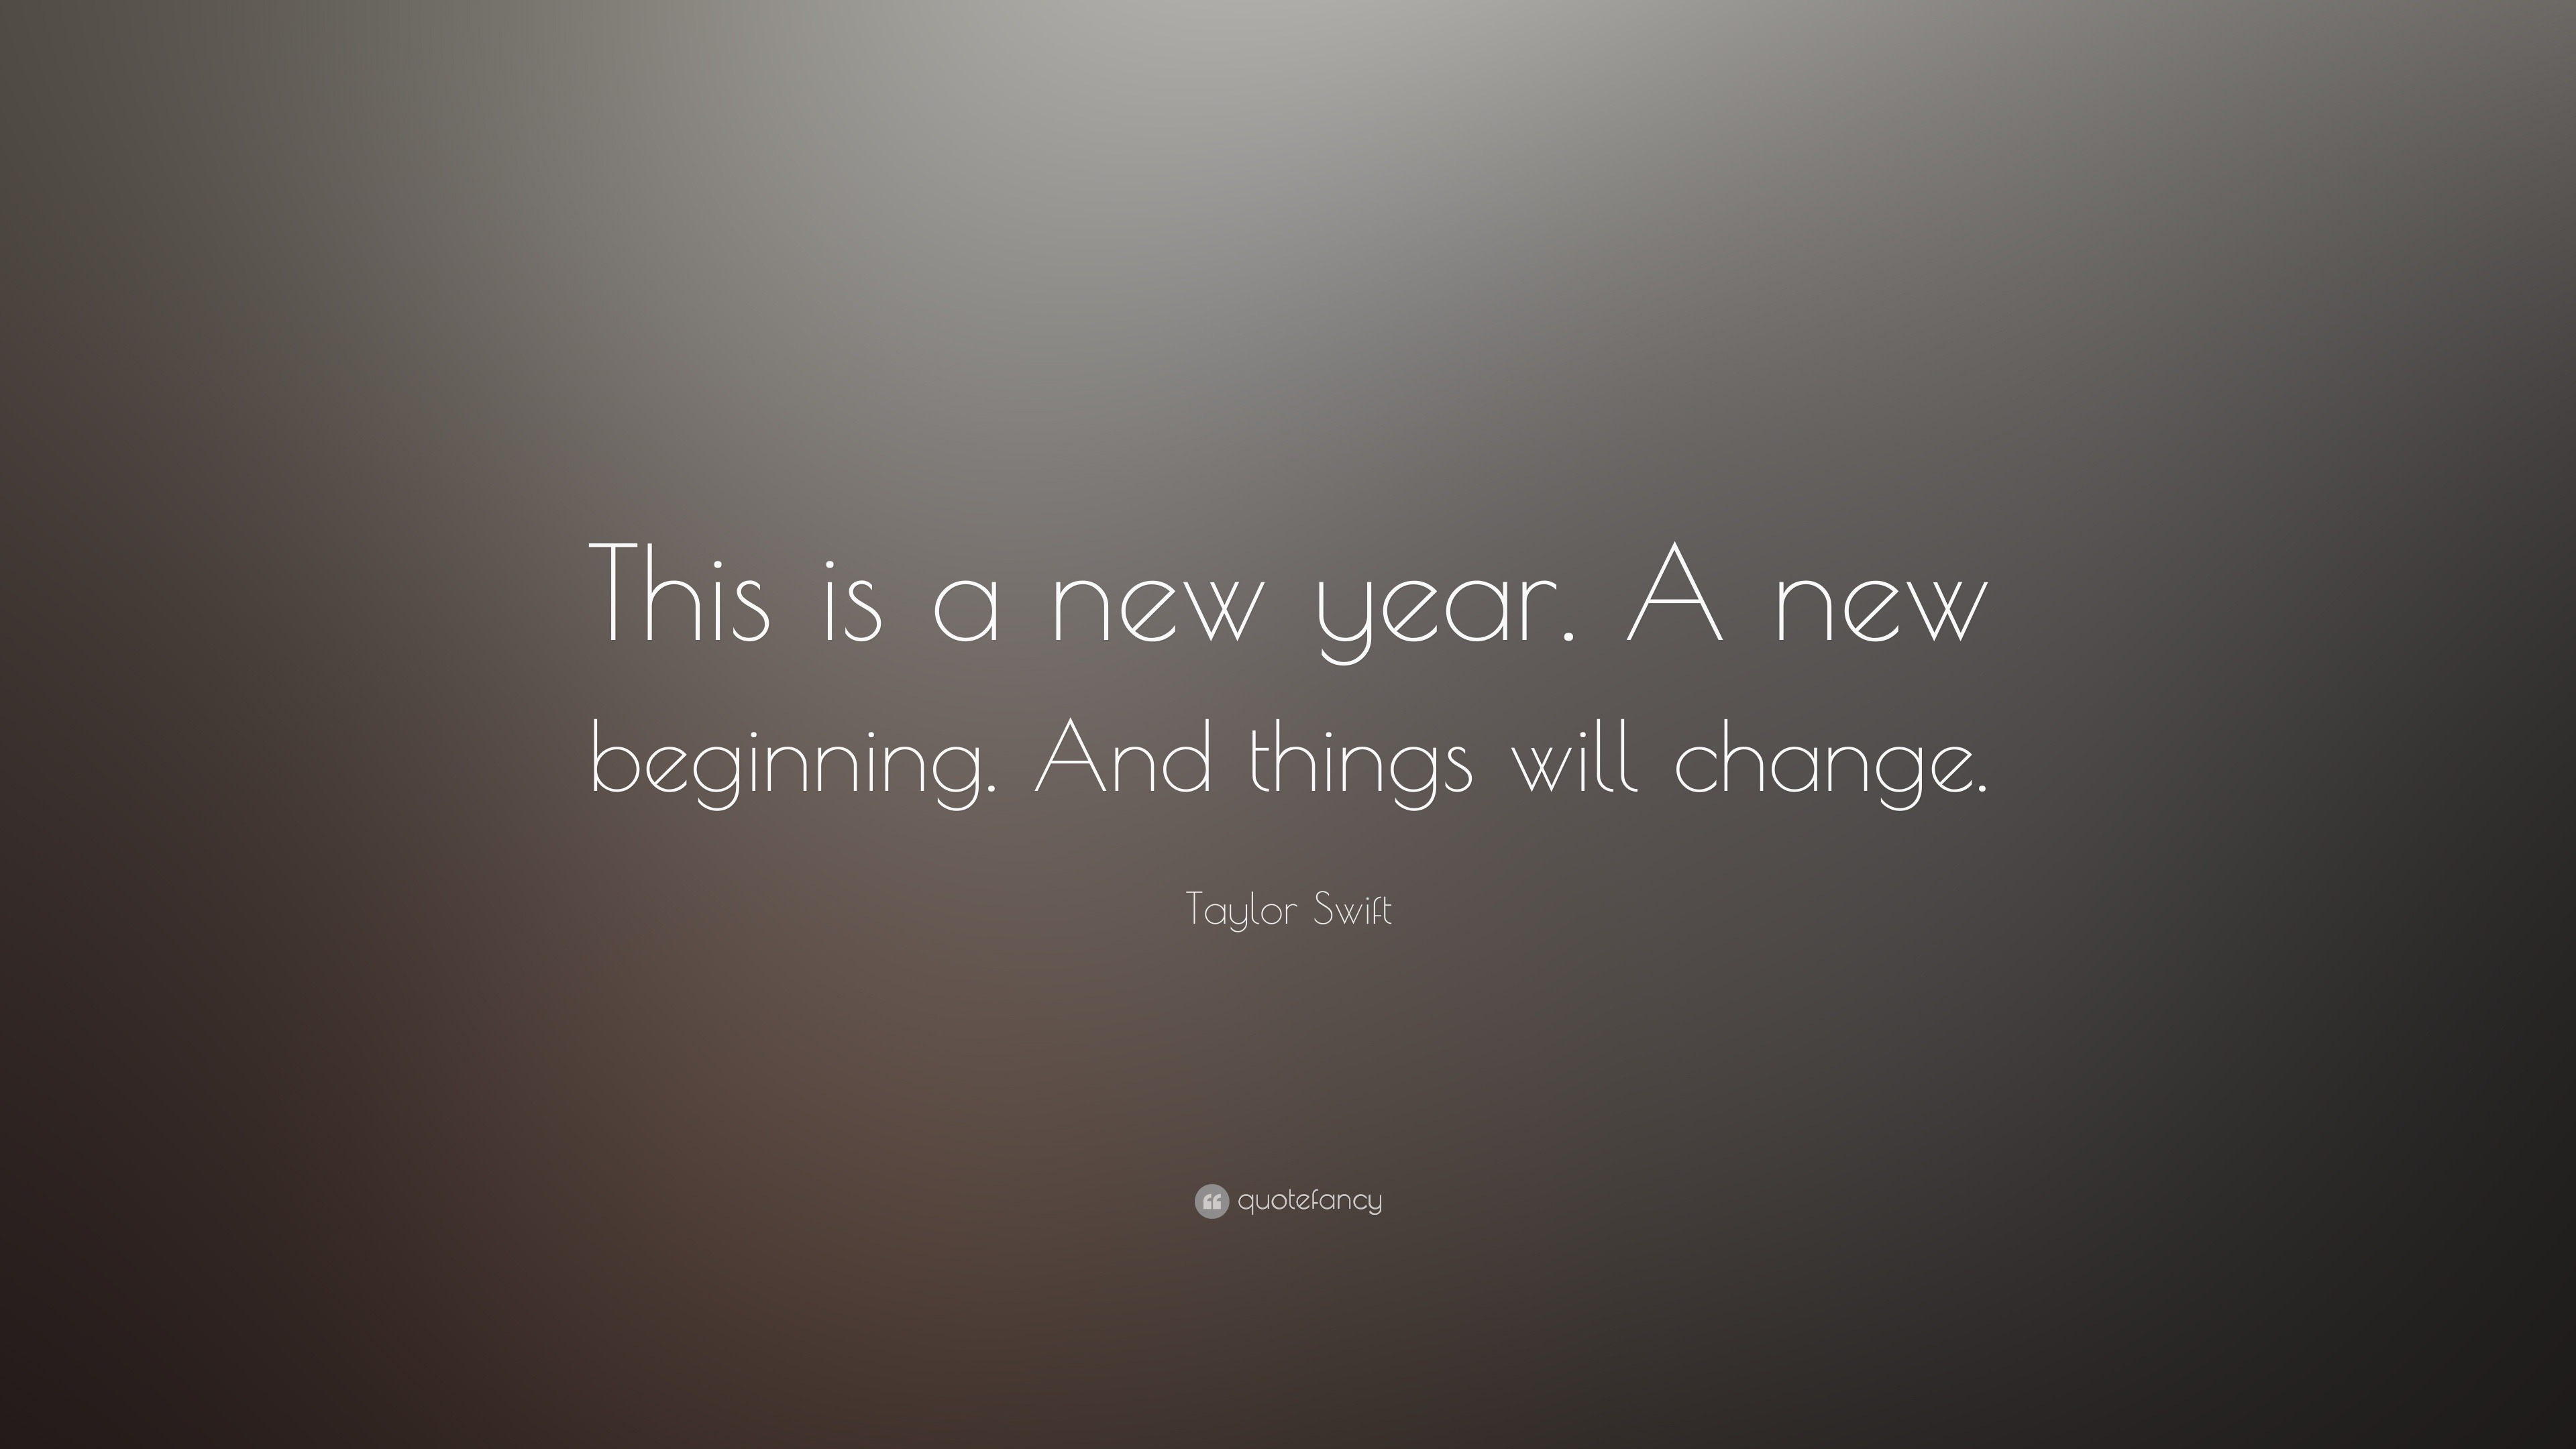 Taylor Swift Quote: “This is a new year. A new beginning. And things